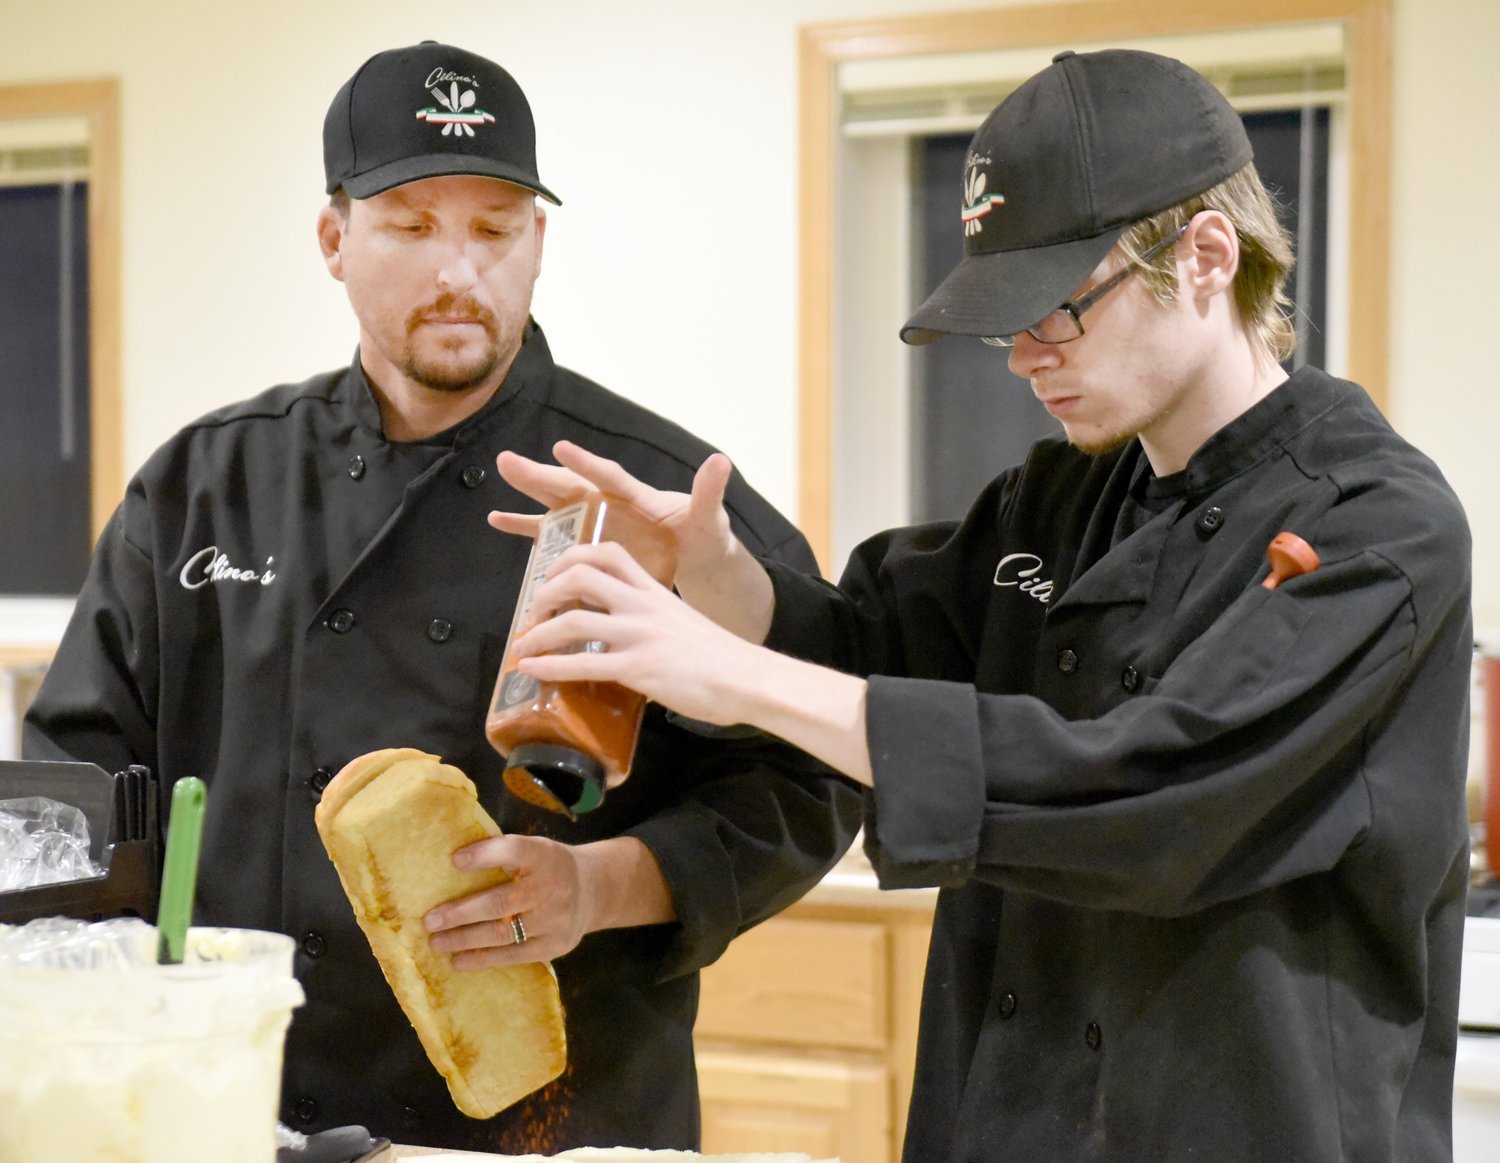 Chef Randy Rodgers of Cilino’s restaurant of Wellman watches cook Tyson Nuezil, 21, put the finishing touches on the garlic bread before serving a five-course meal at the Washington County Community Foundation’s Chef Spotlight dinner on Nov. 4.  A dessert auction, featuring Dwight Duwa, benefitted both the foundation and the Kalona Historical Village.